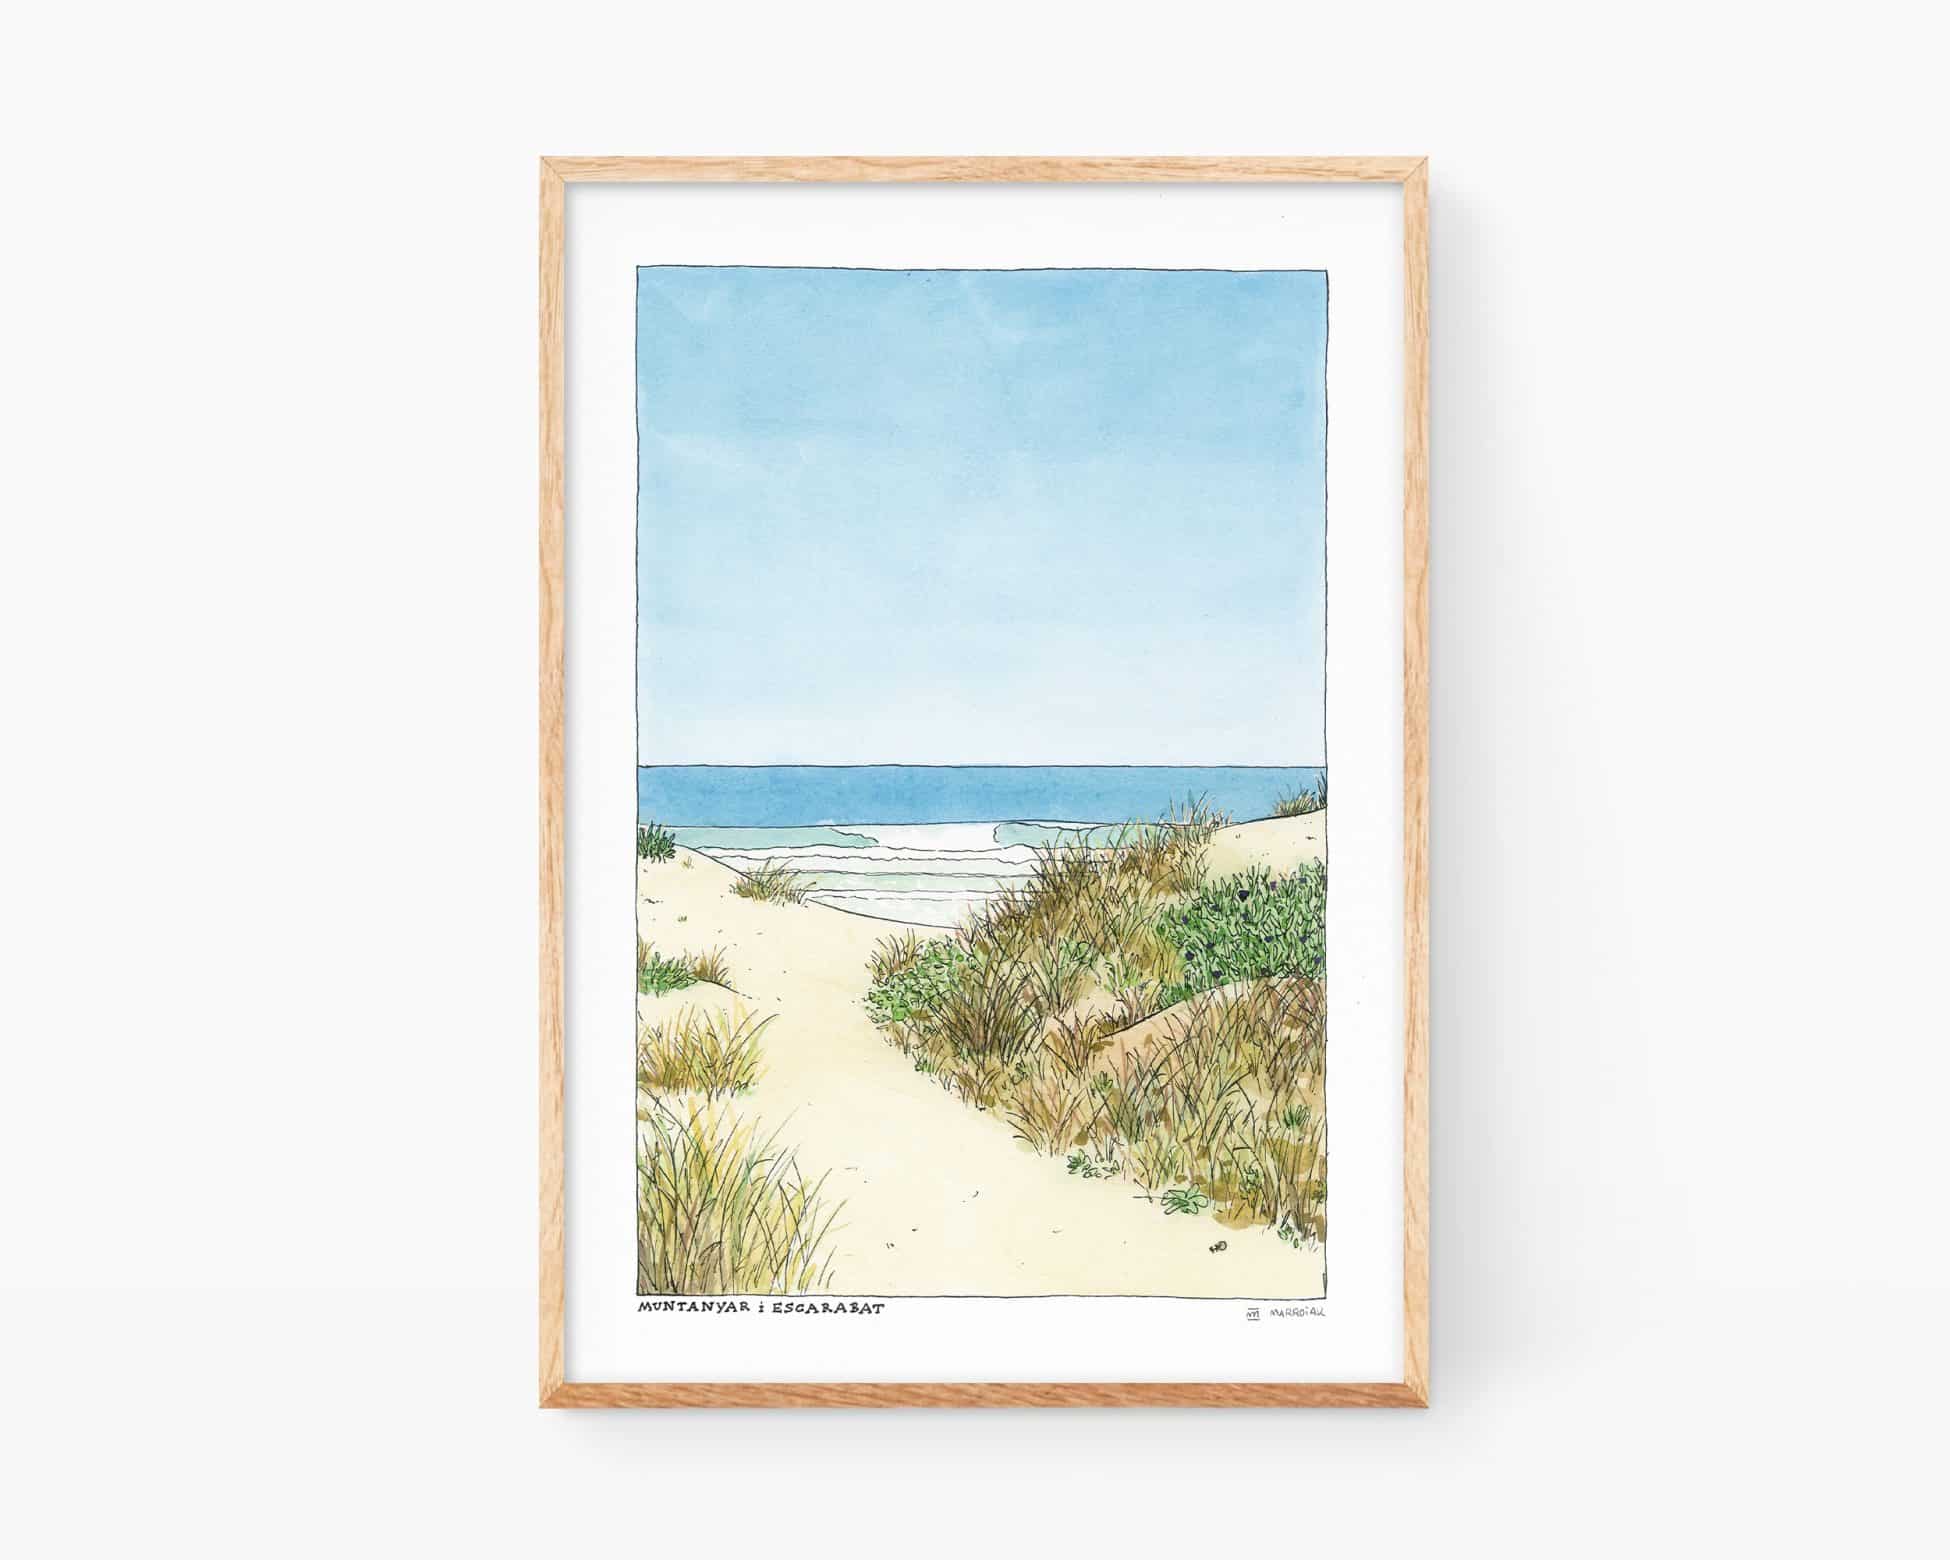 Wall art print with a landscape of a Valencian sandy beach in Oliva (La Safor). Watercolor illustration painting with dunes, waves and a blue sky.